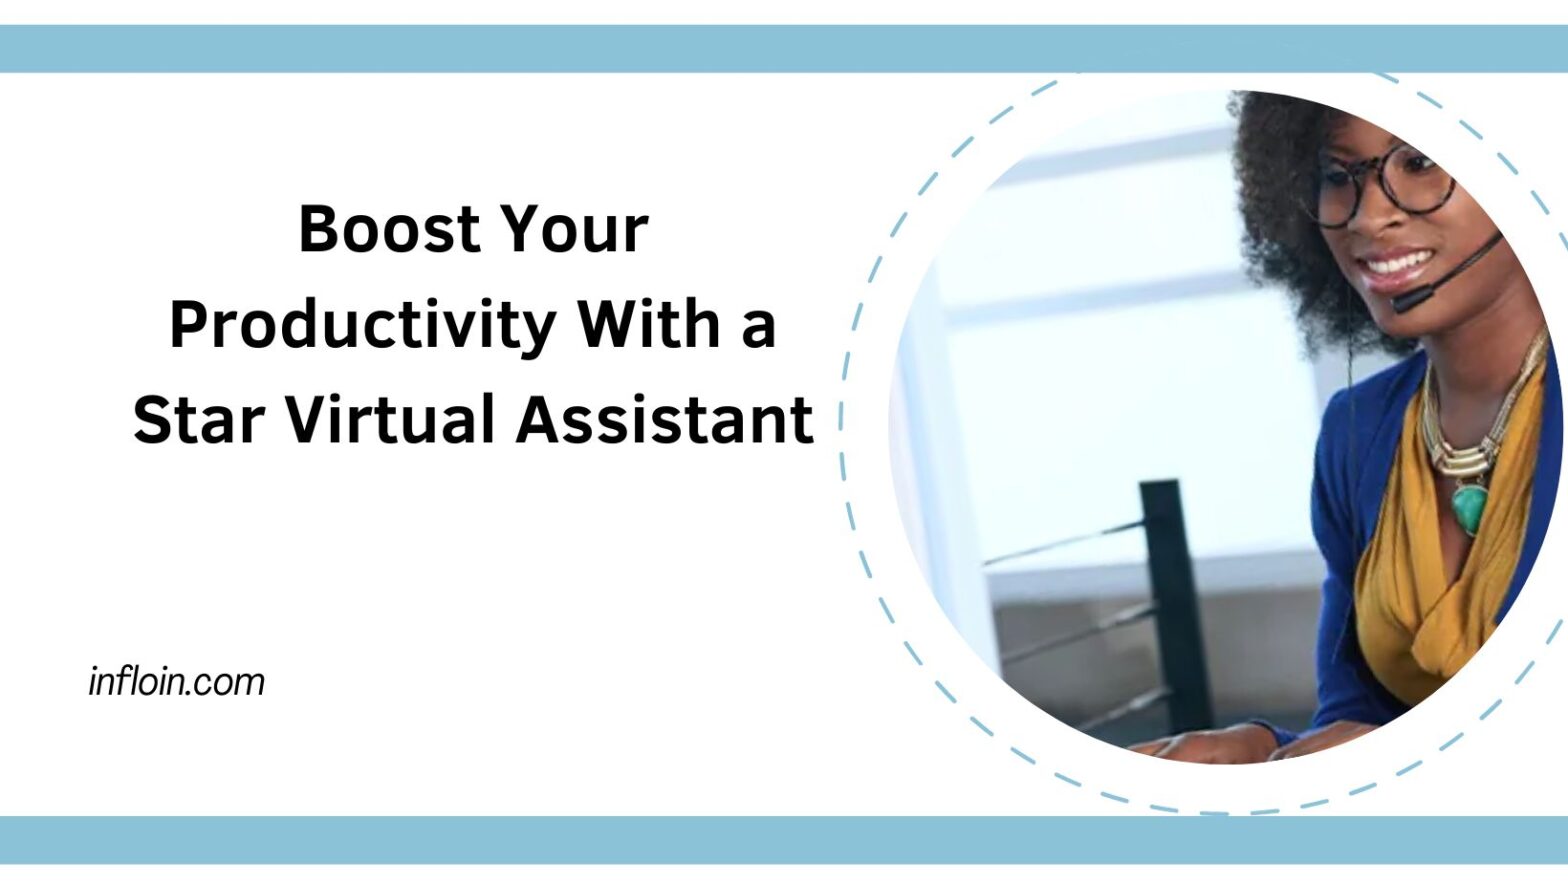 Boost Your Productivity With a Star Virtual Assistant